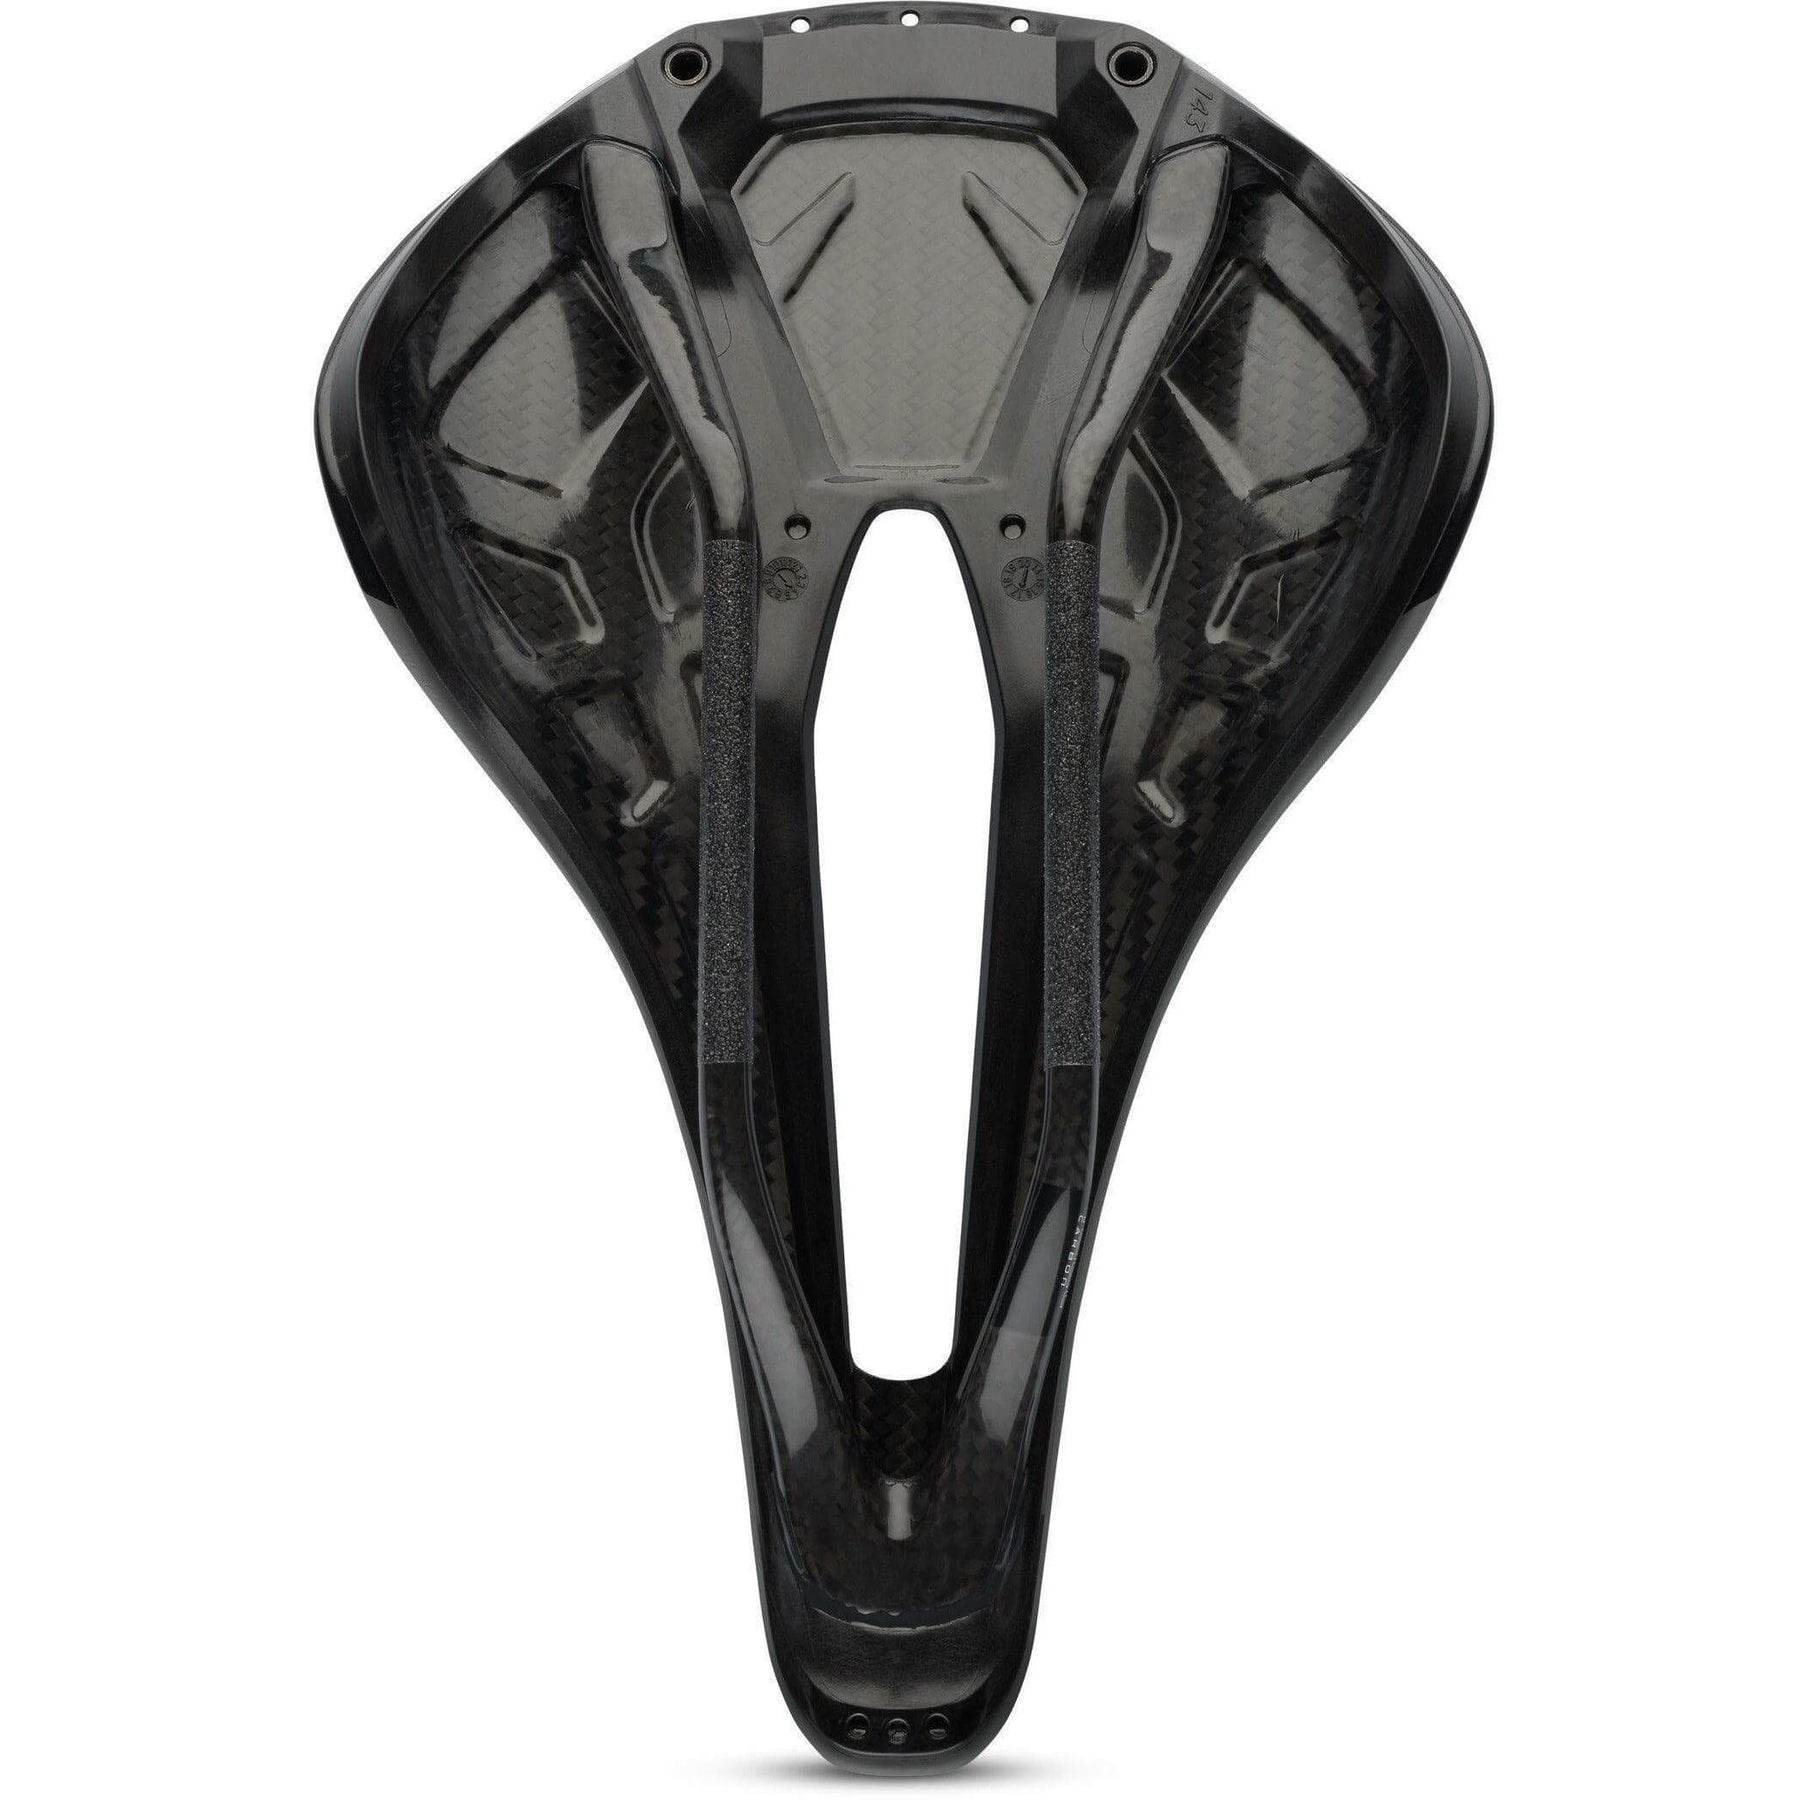 S-Works Power Saddle | Strictly Bicycles – Strictly Bicycles